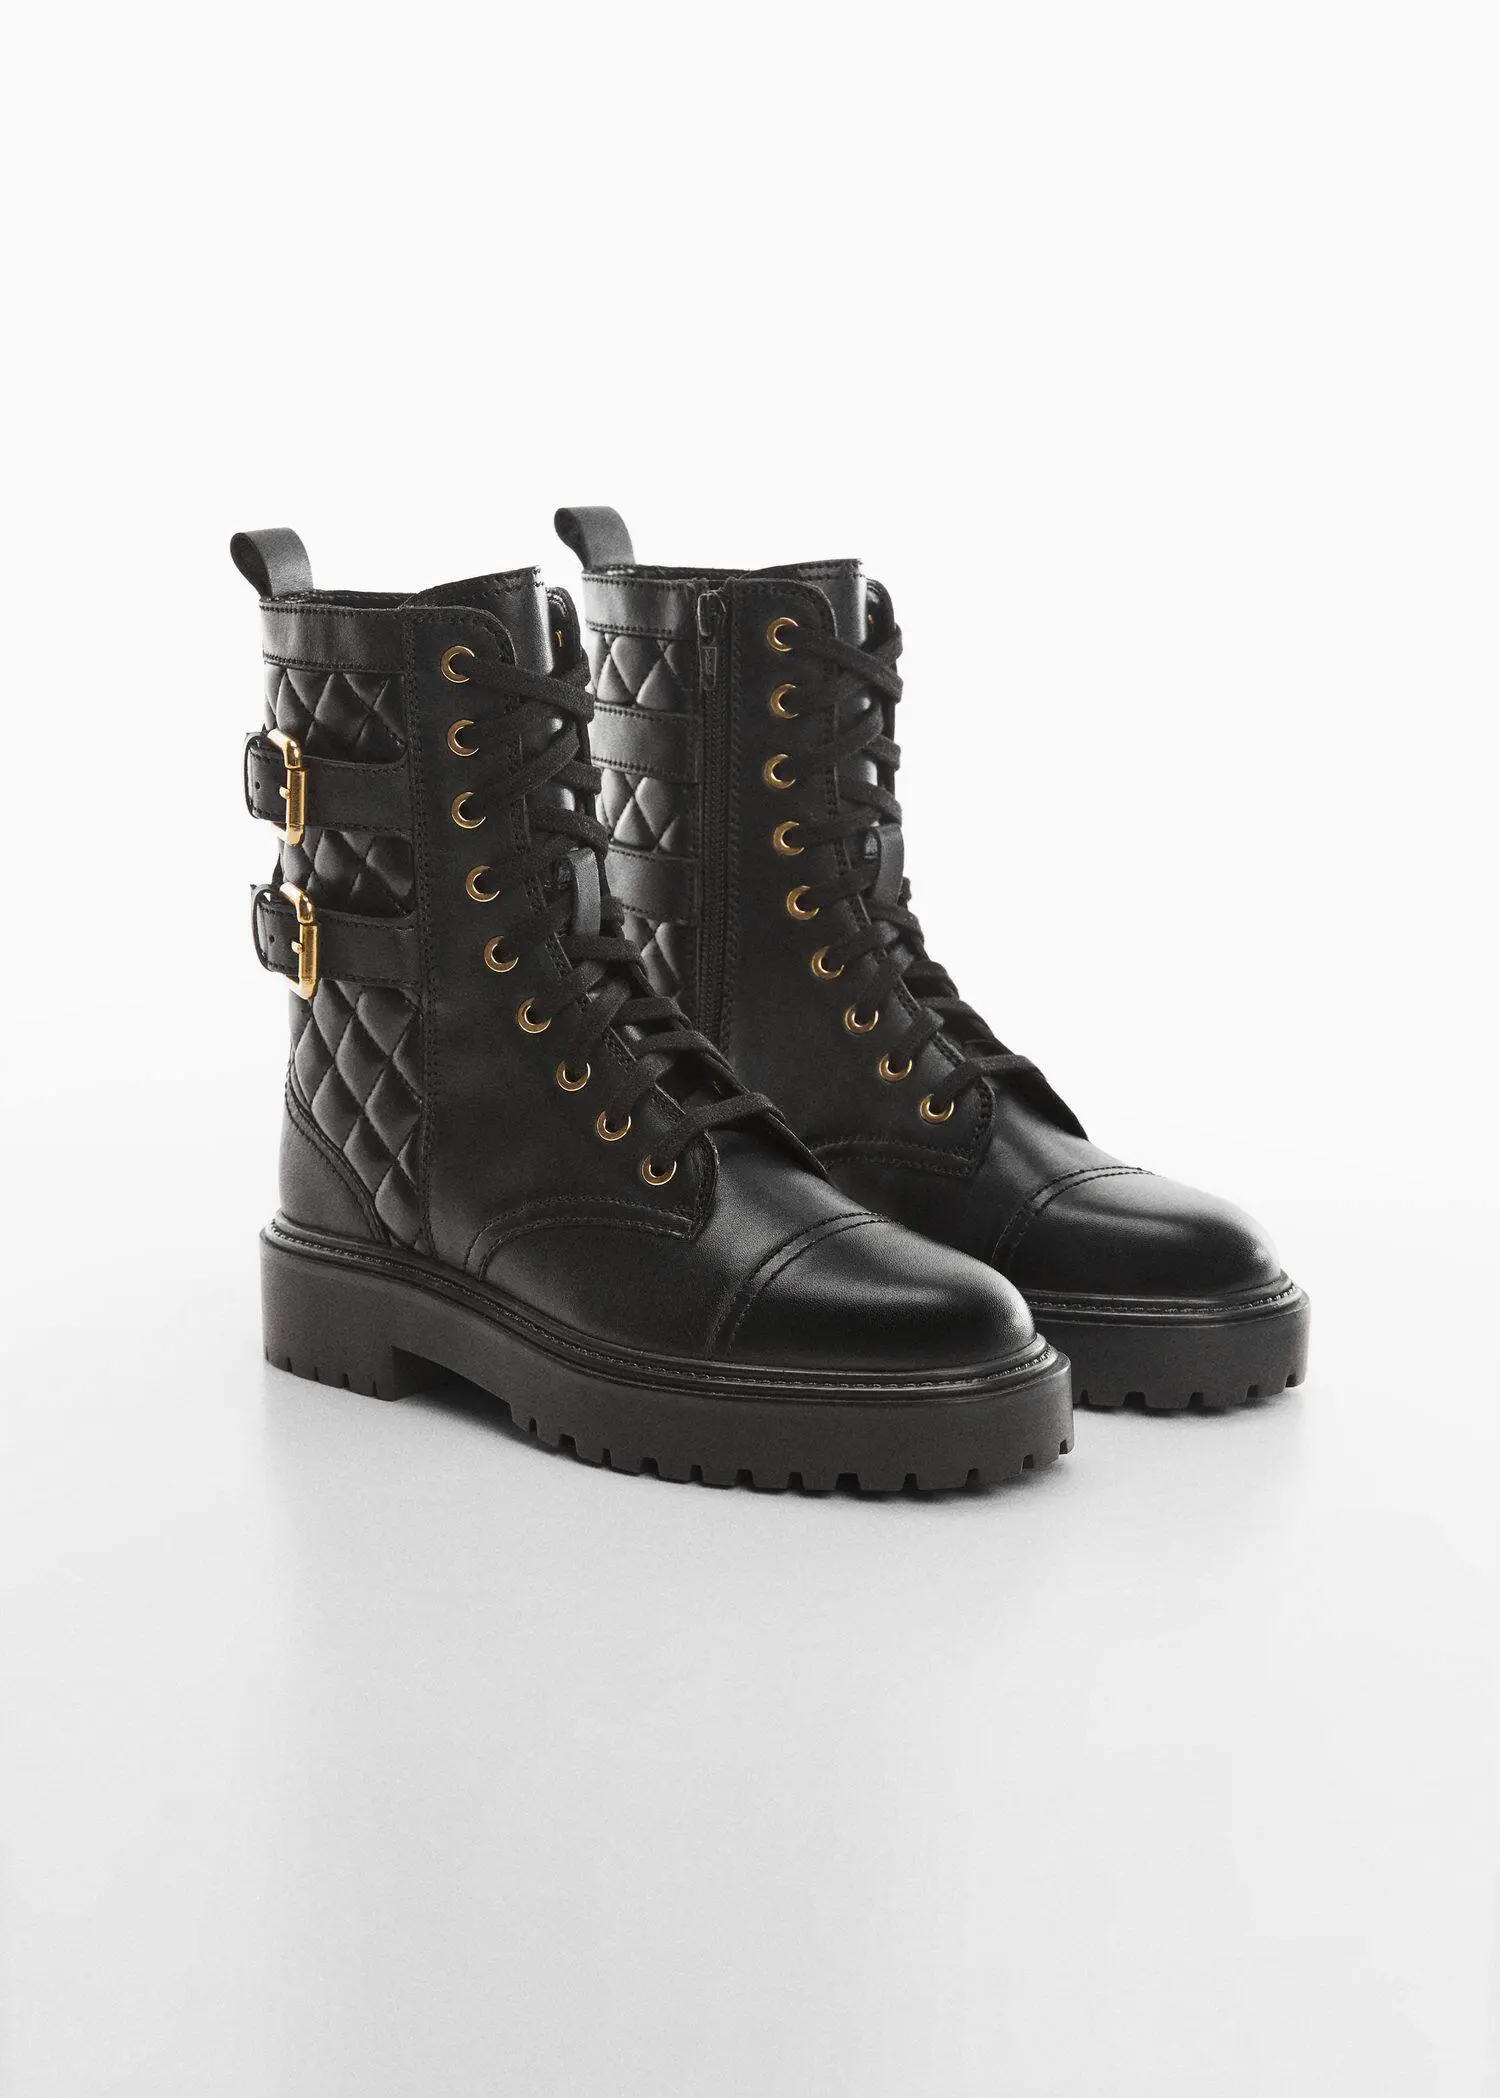 Mango Military leather ankle boots. 2